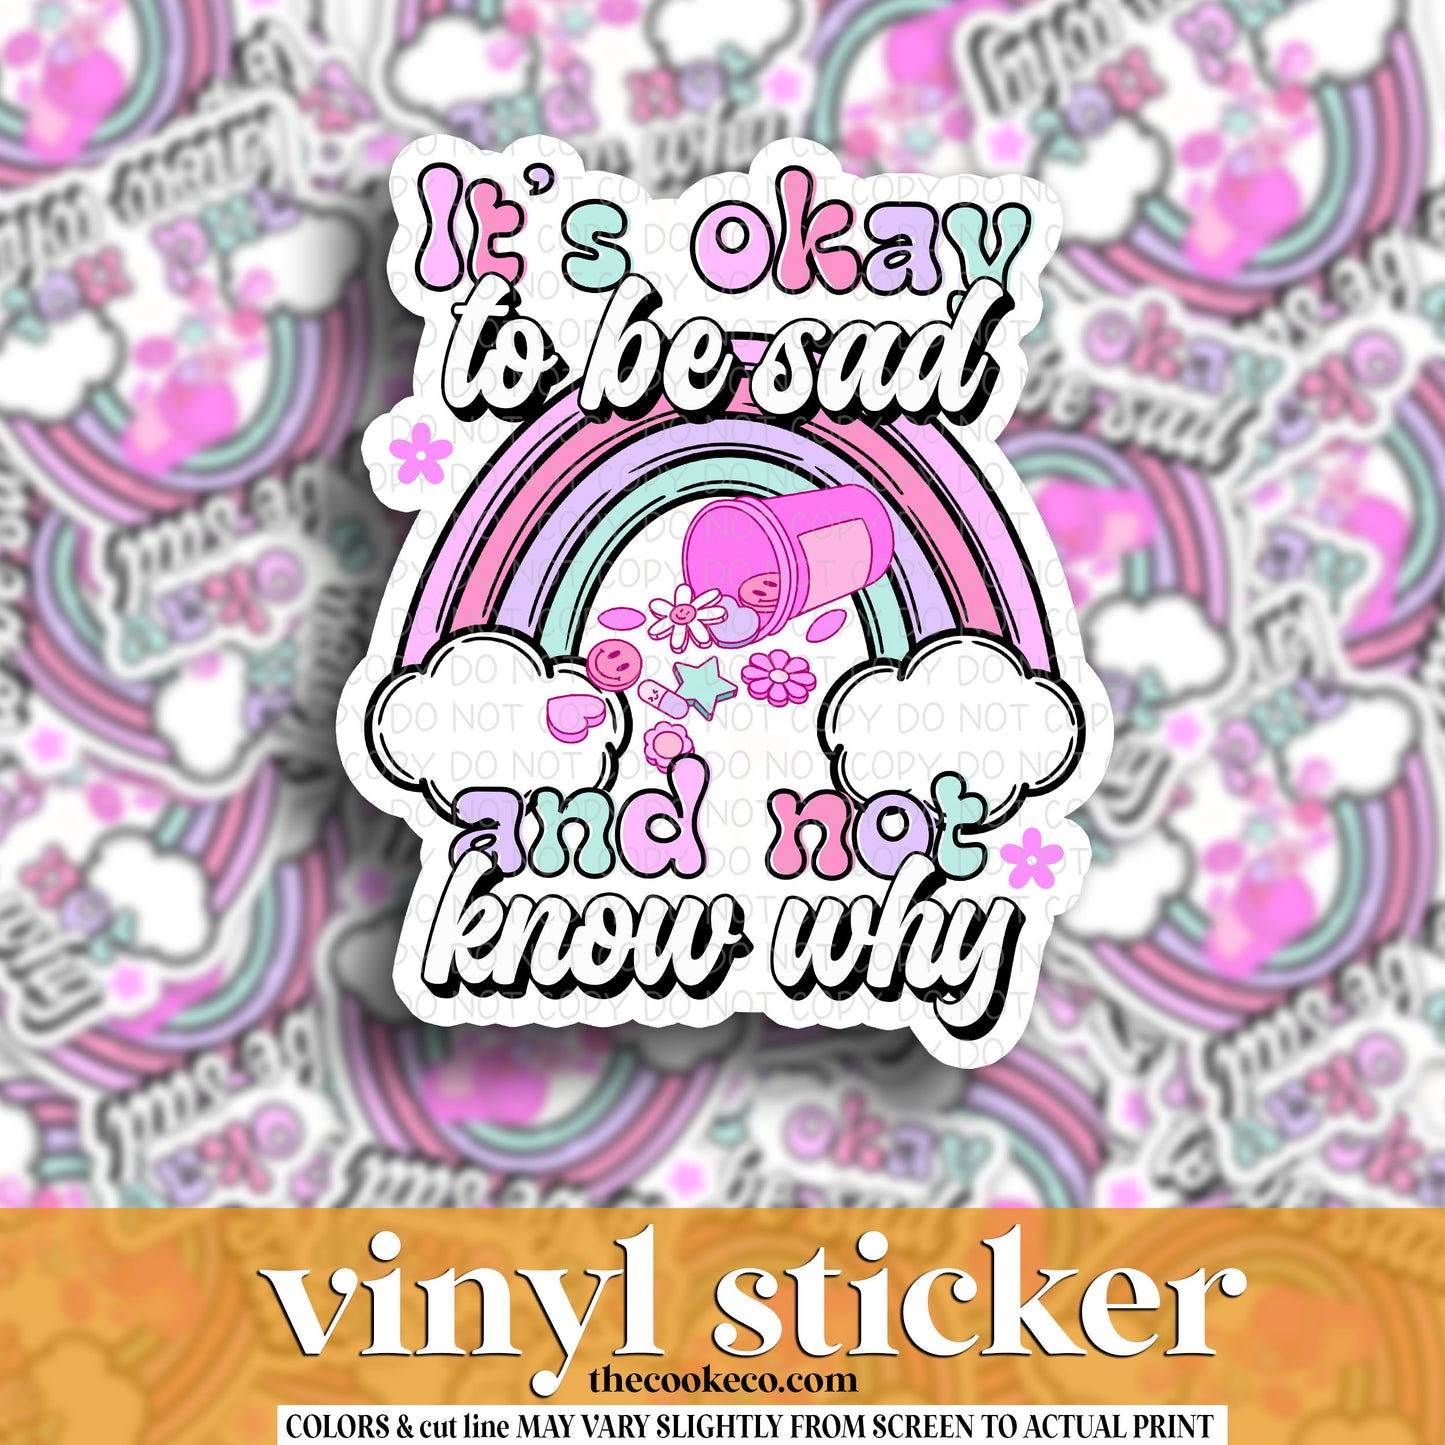 Vinyl Sticker | #V1600 -  IT'S OKAY TO BE SAD AND NOT KNOW WHY